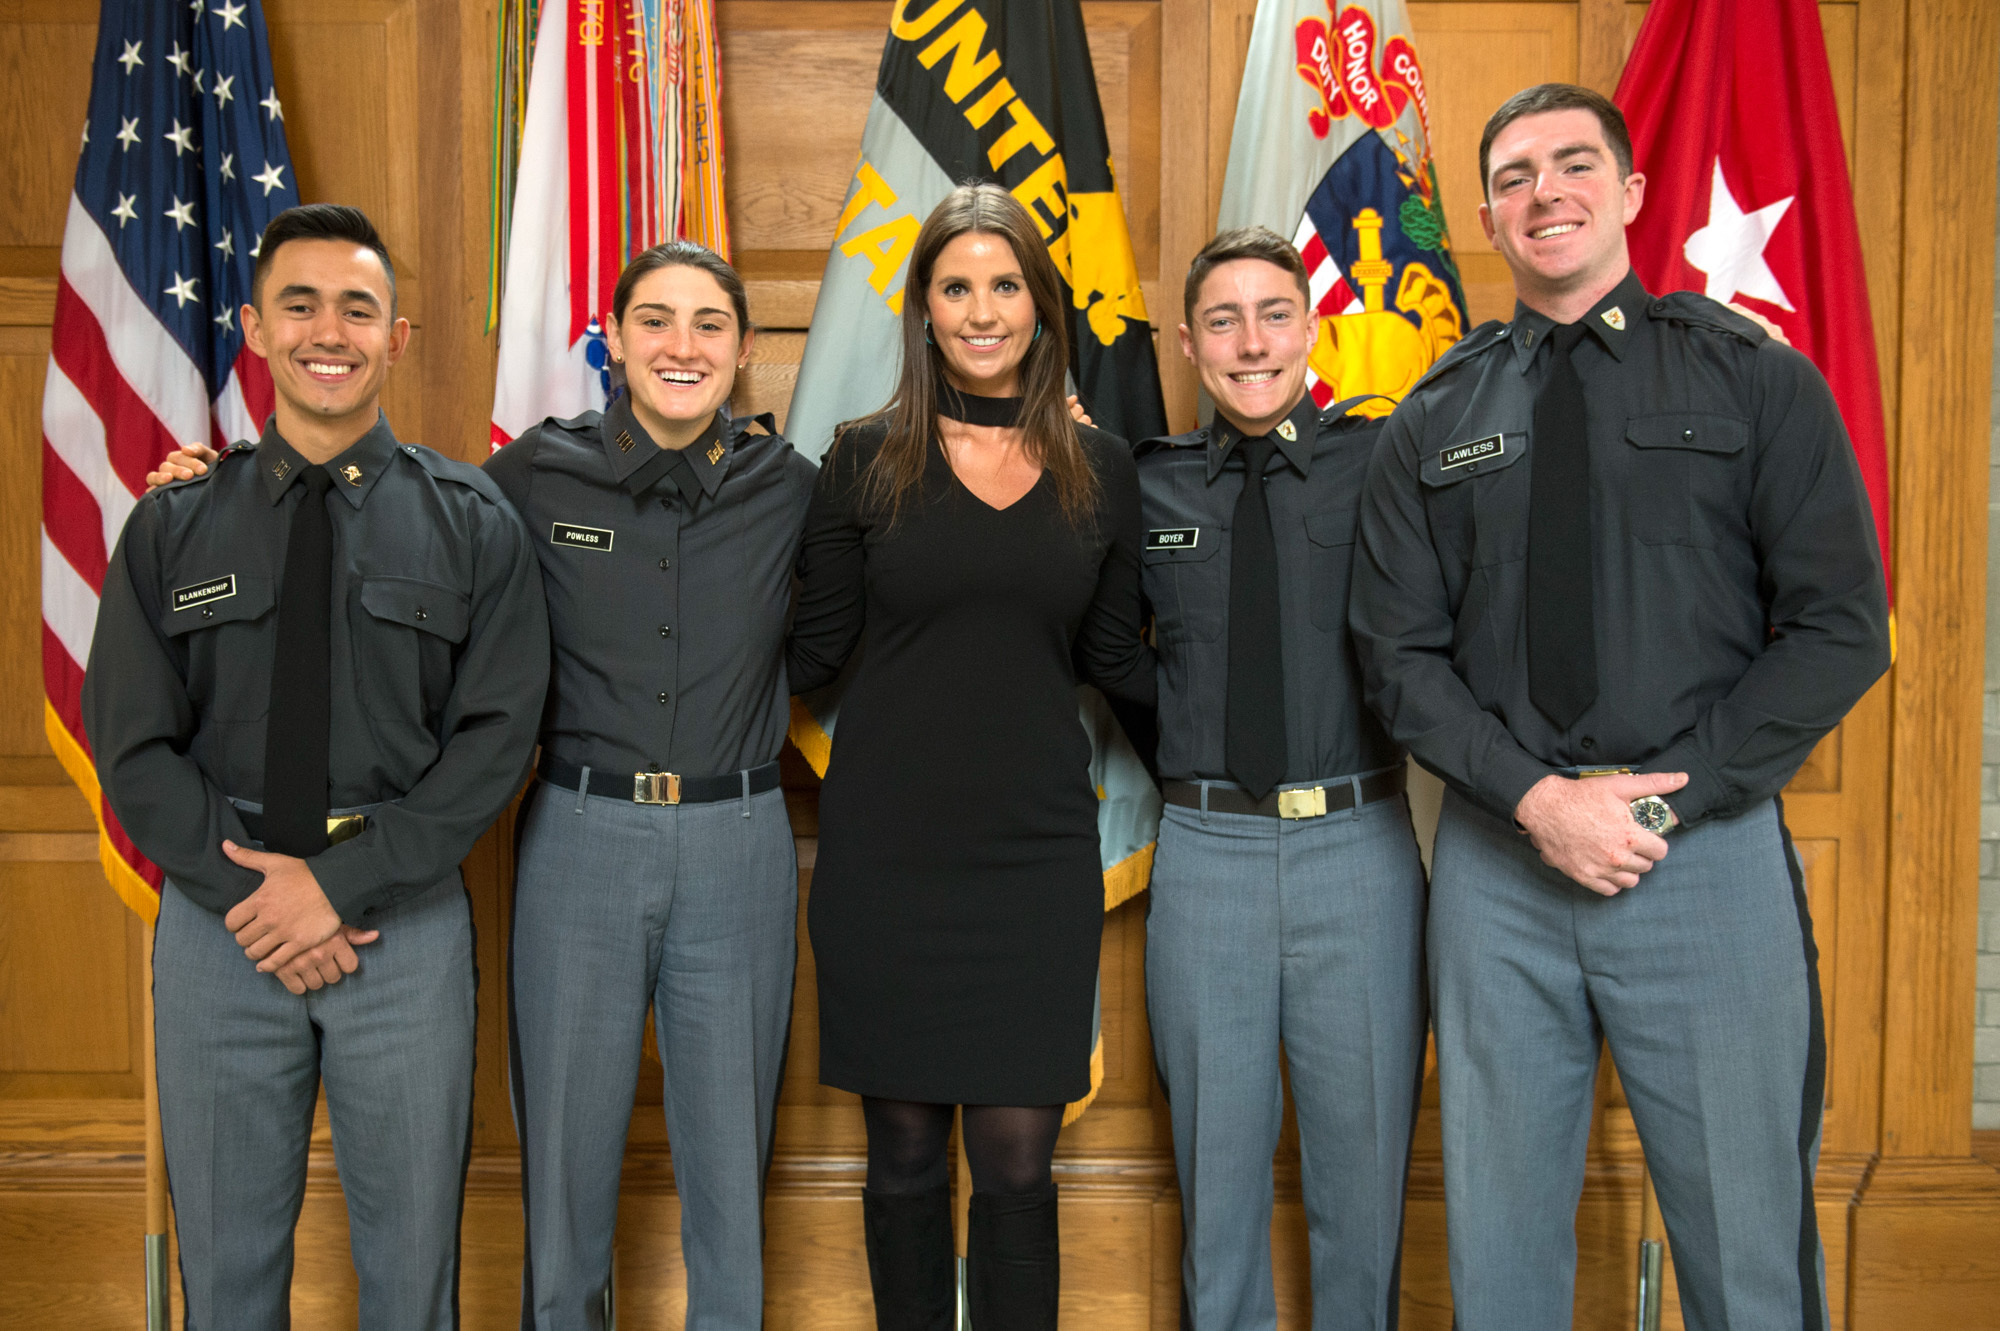 Native American culture runs deep within the USMA Corps of Cadets